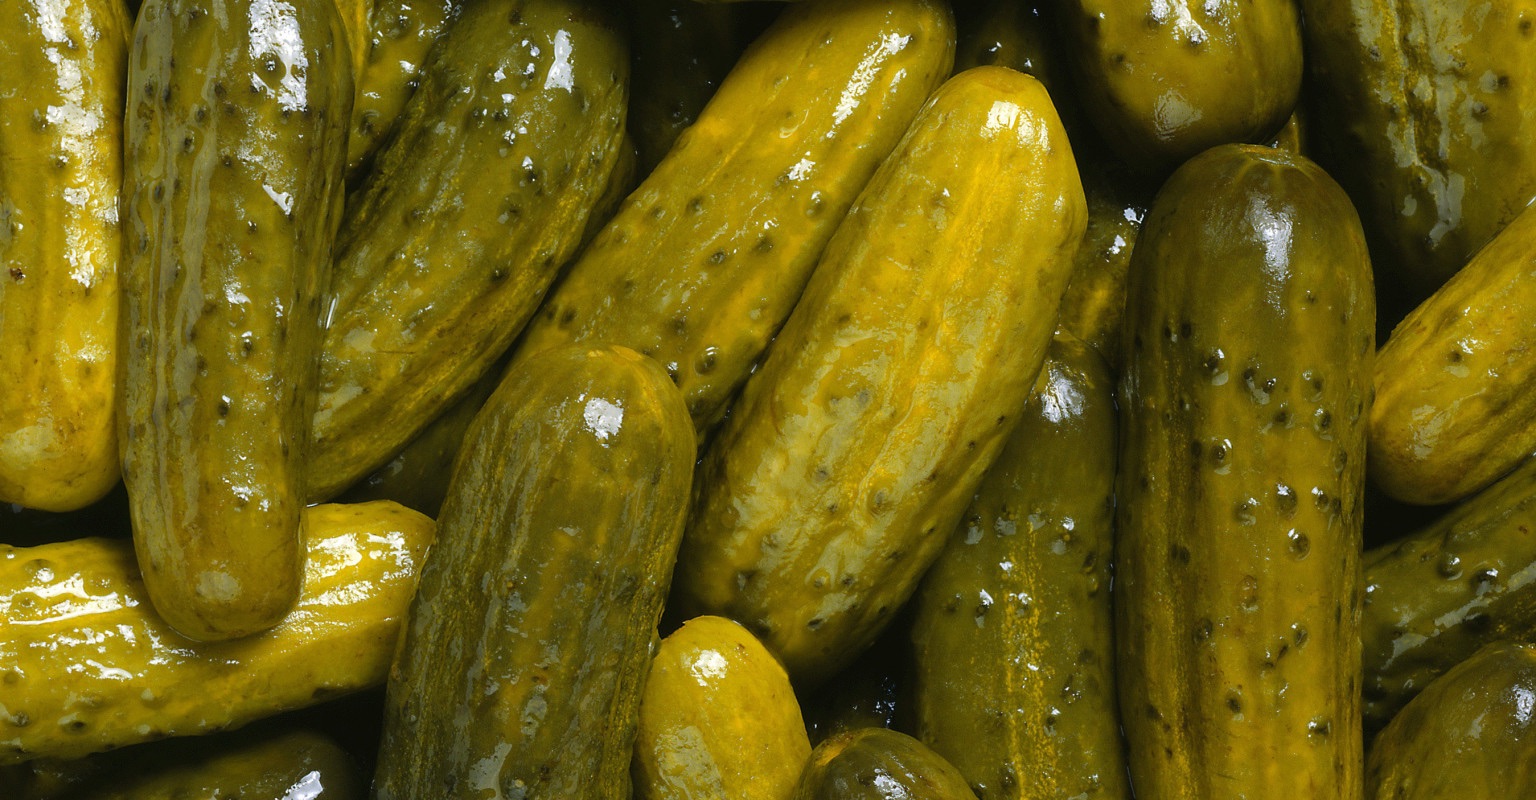 pickles reduce anxiety